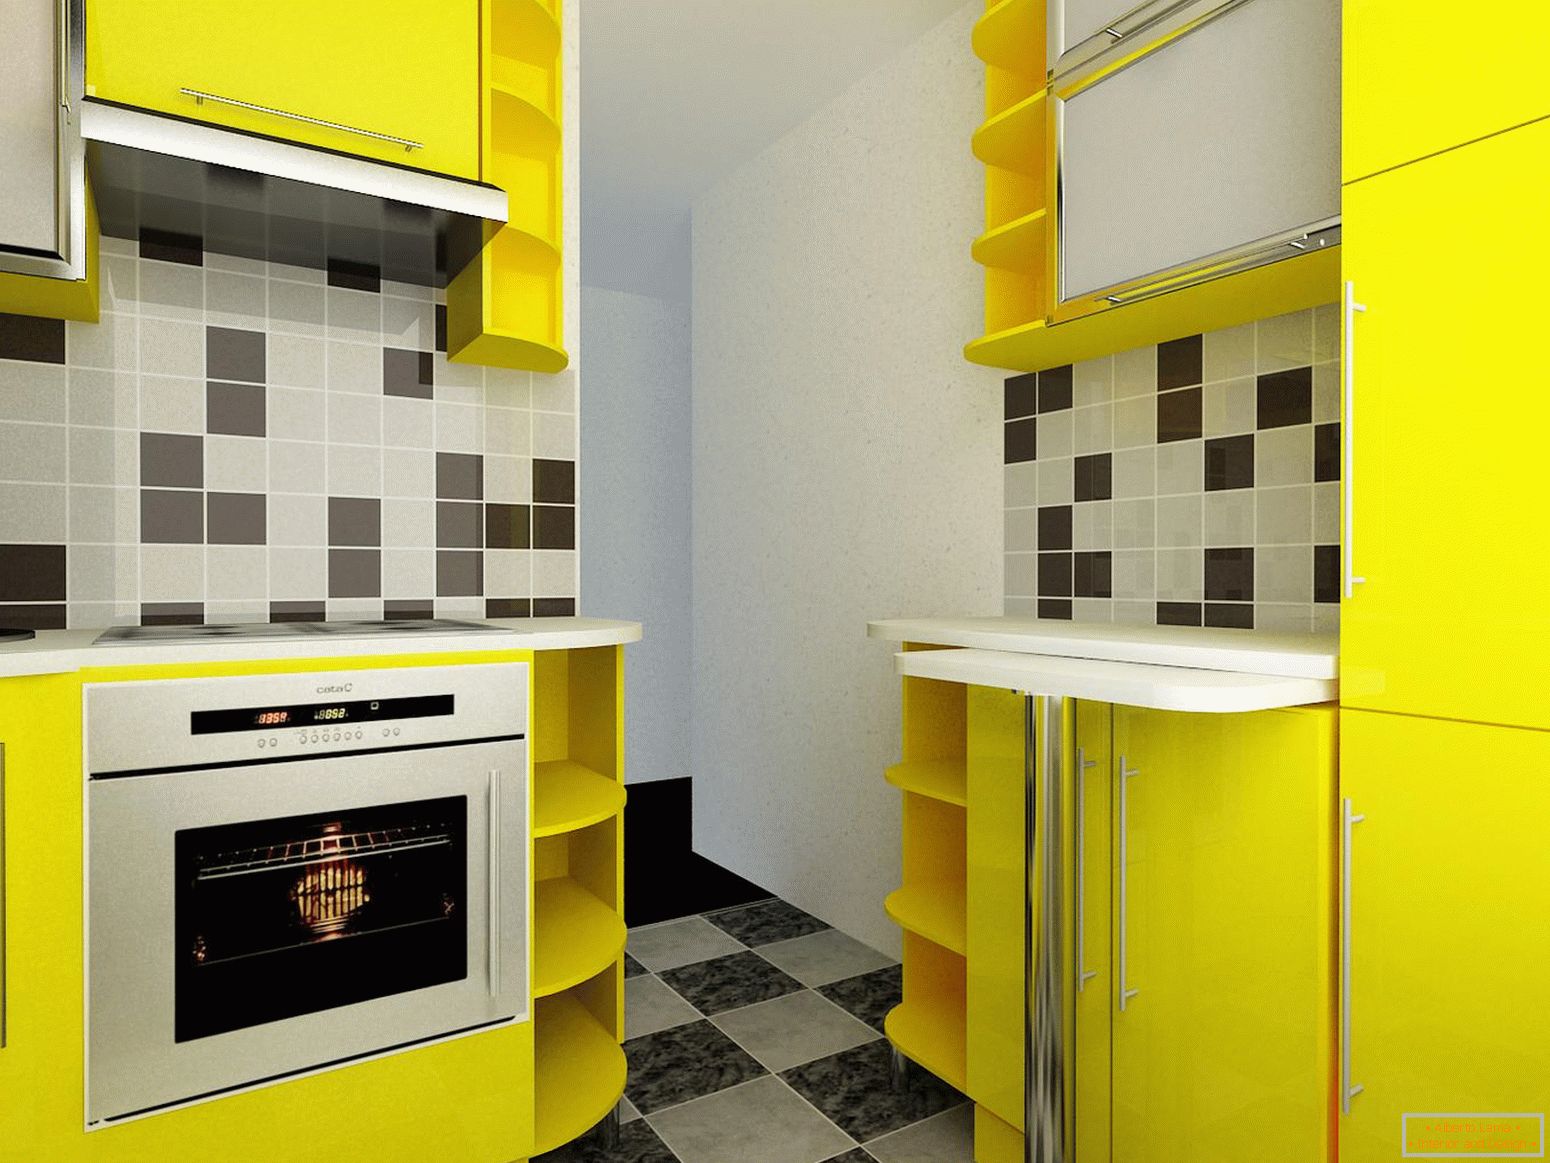 Small kitchen in yellow color